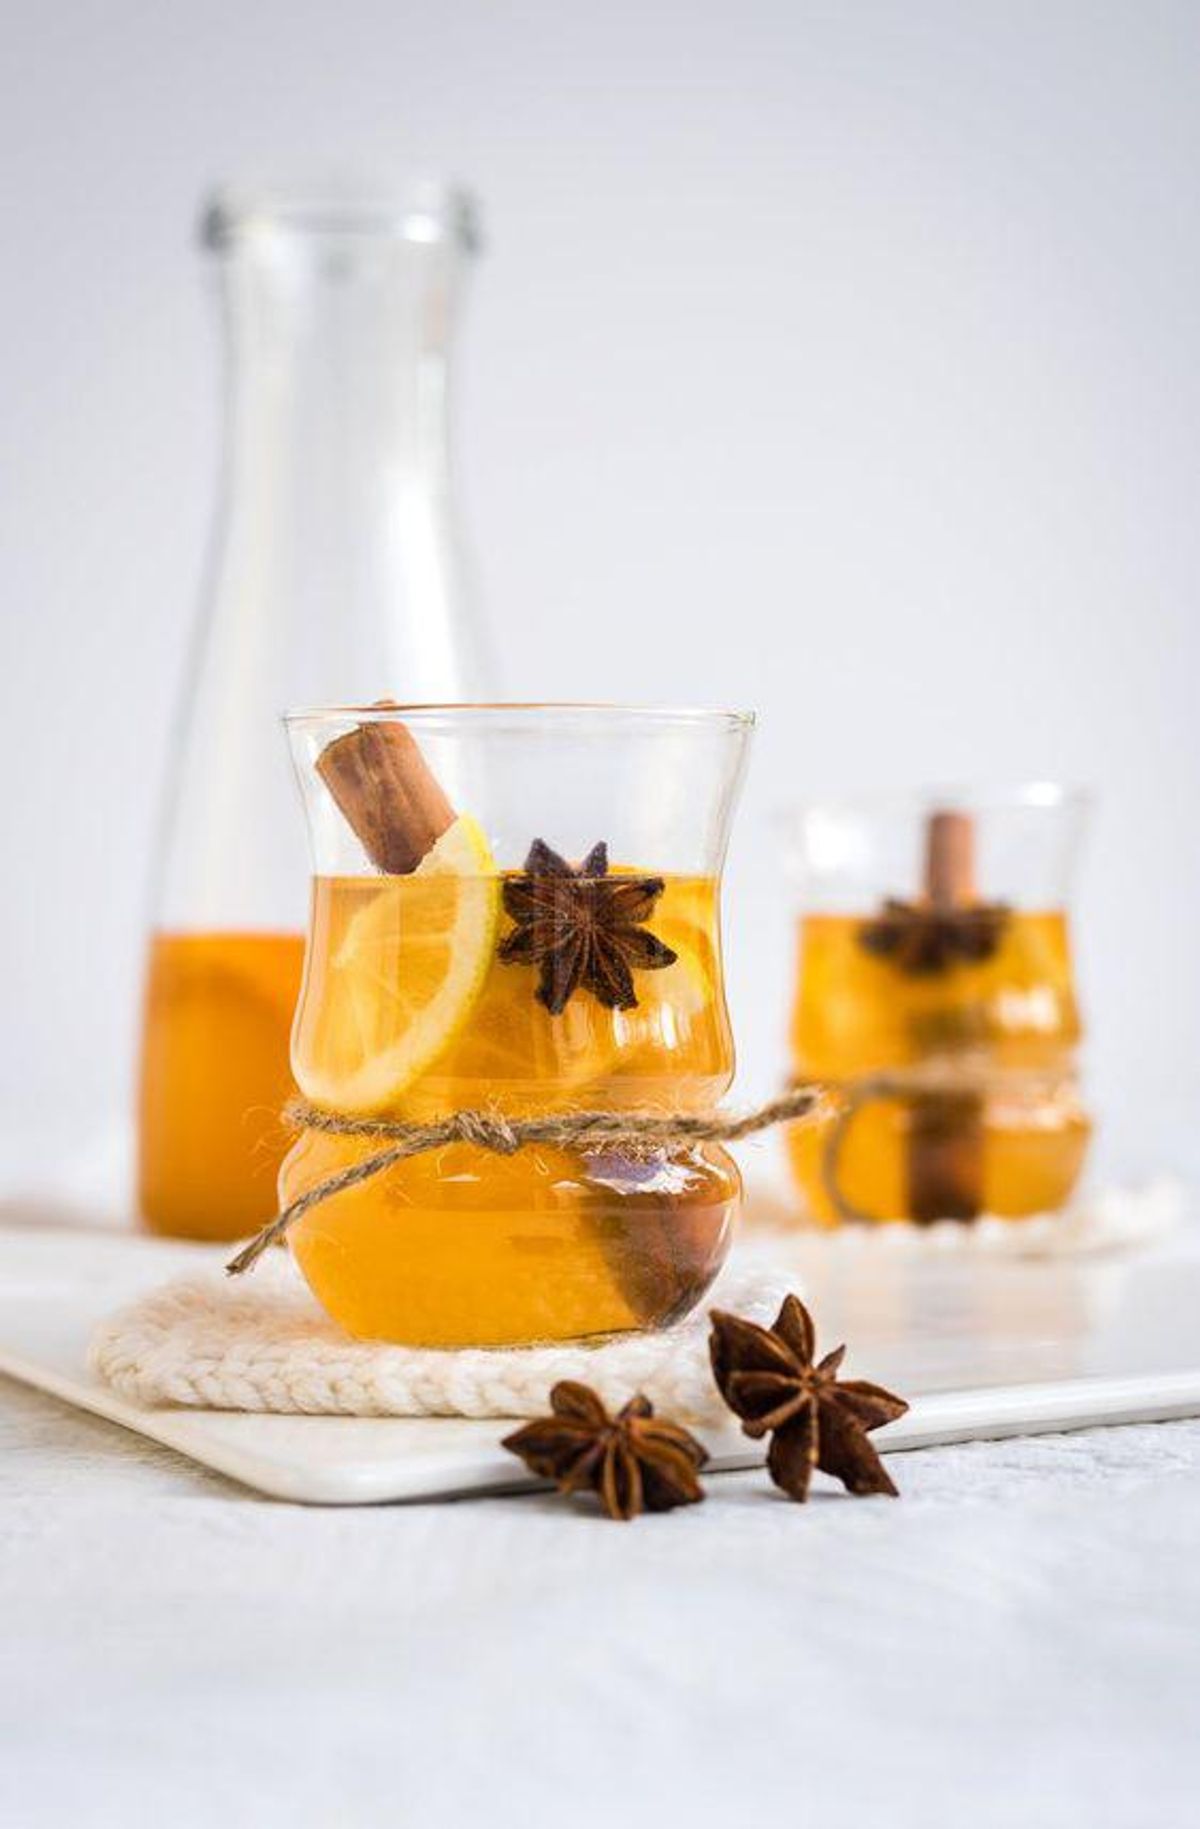 Spiced Wine and Cider Recipes